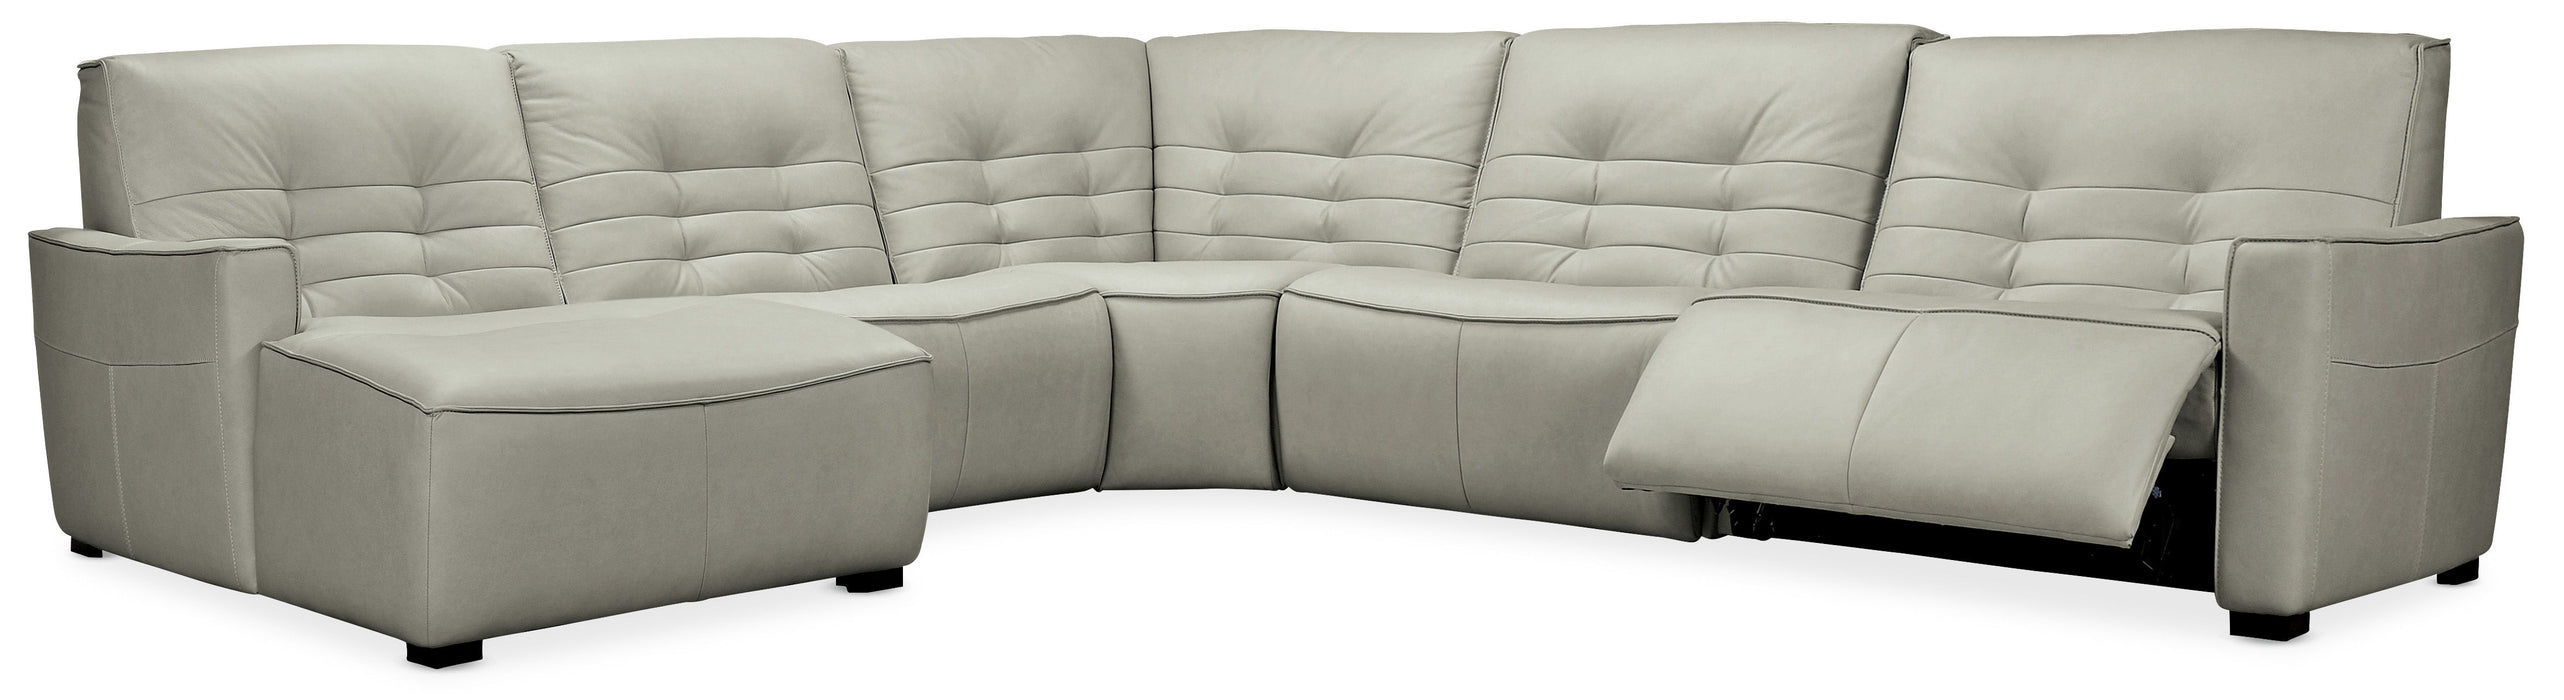 Reaux - Power Reclining Sectional Capital Discount Furniture Home Furniture, Furniture Store